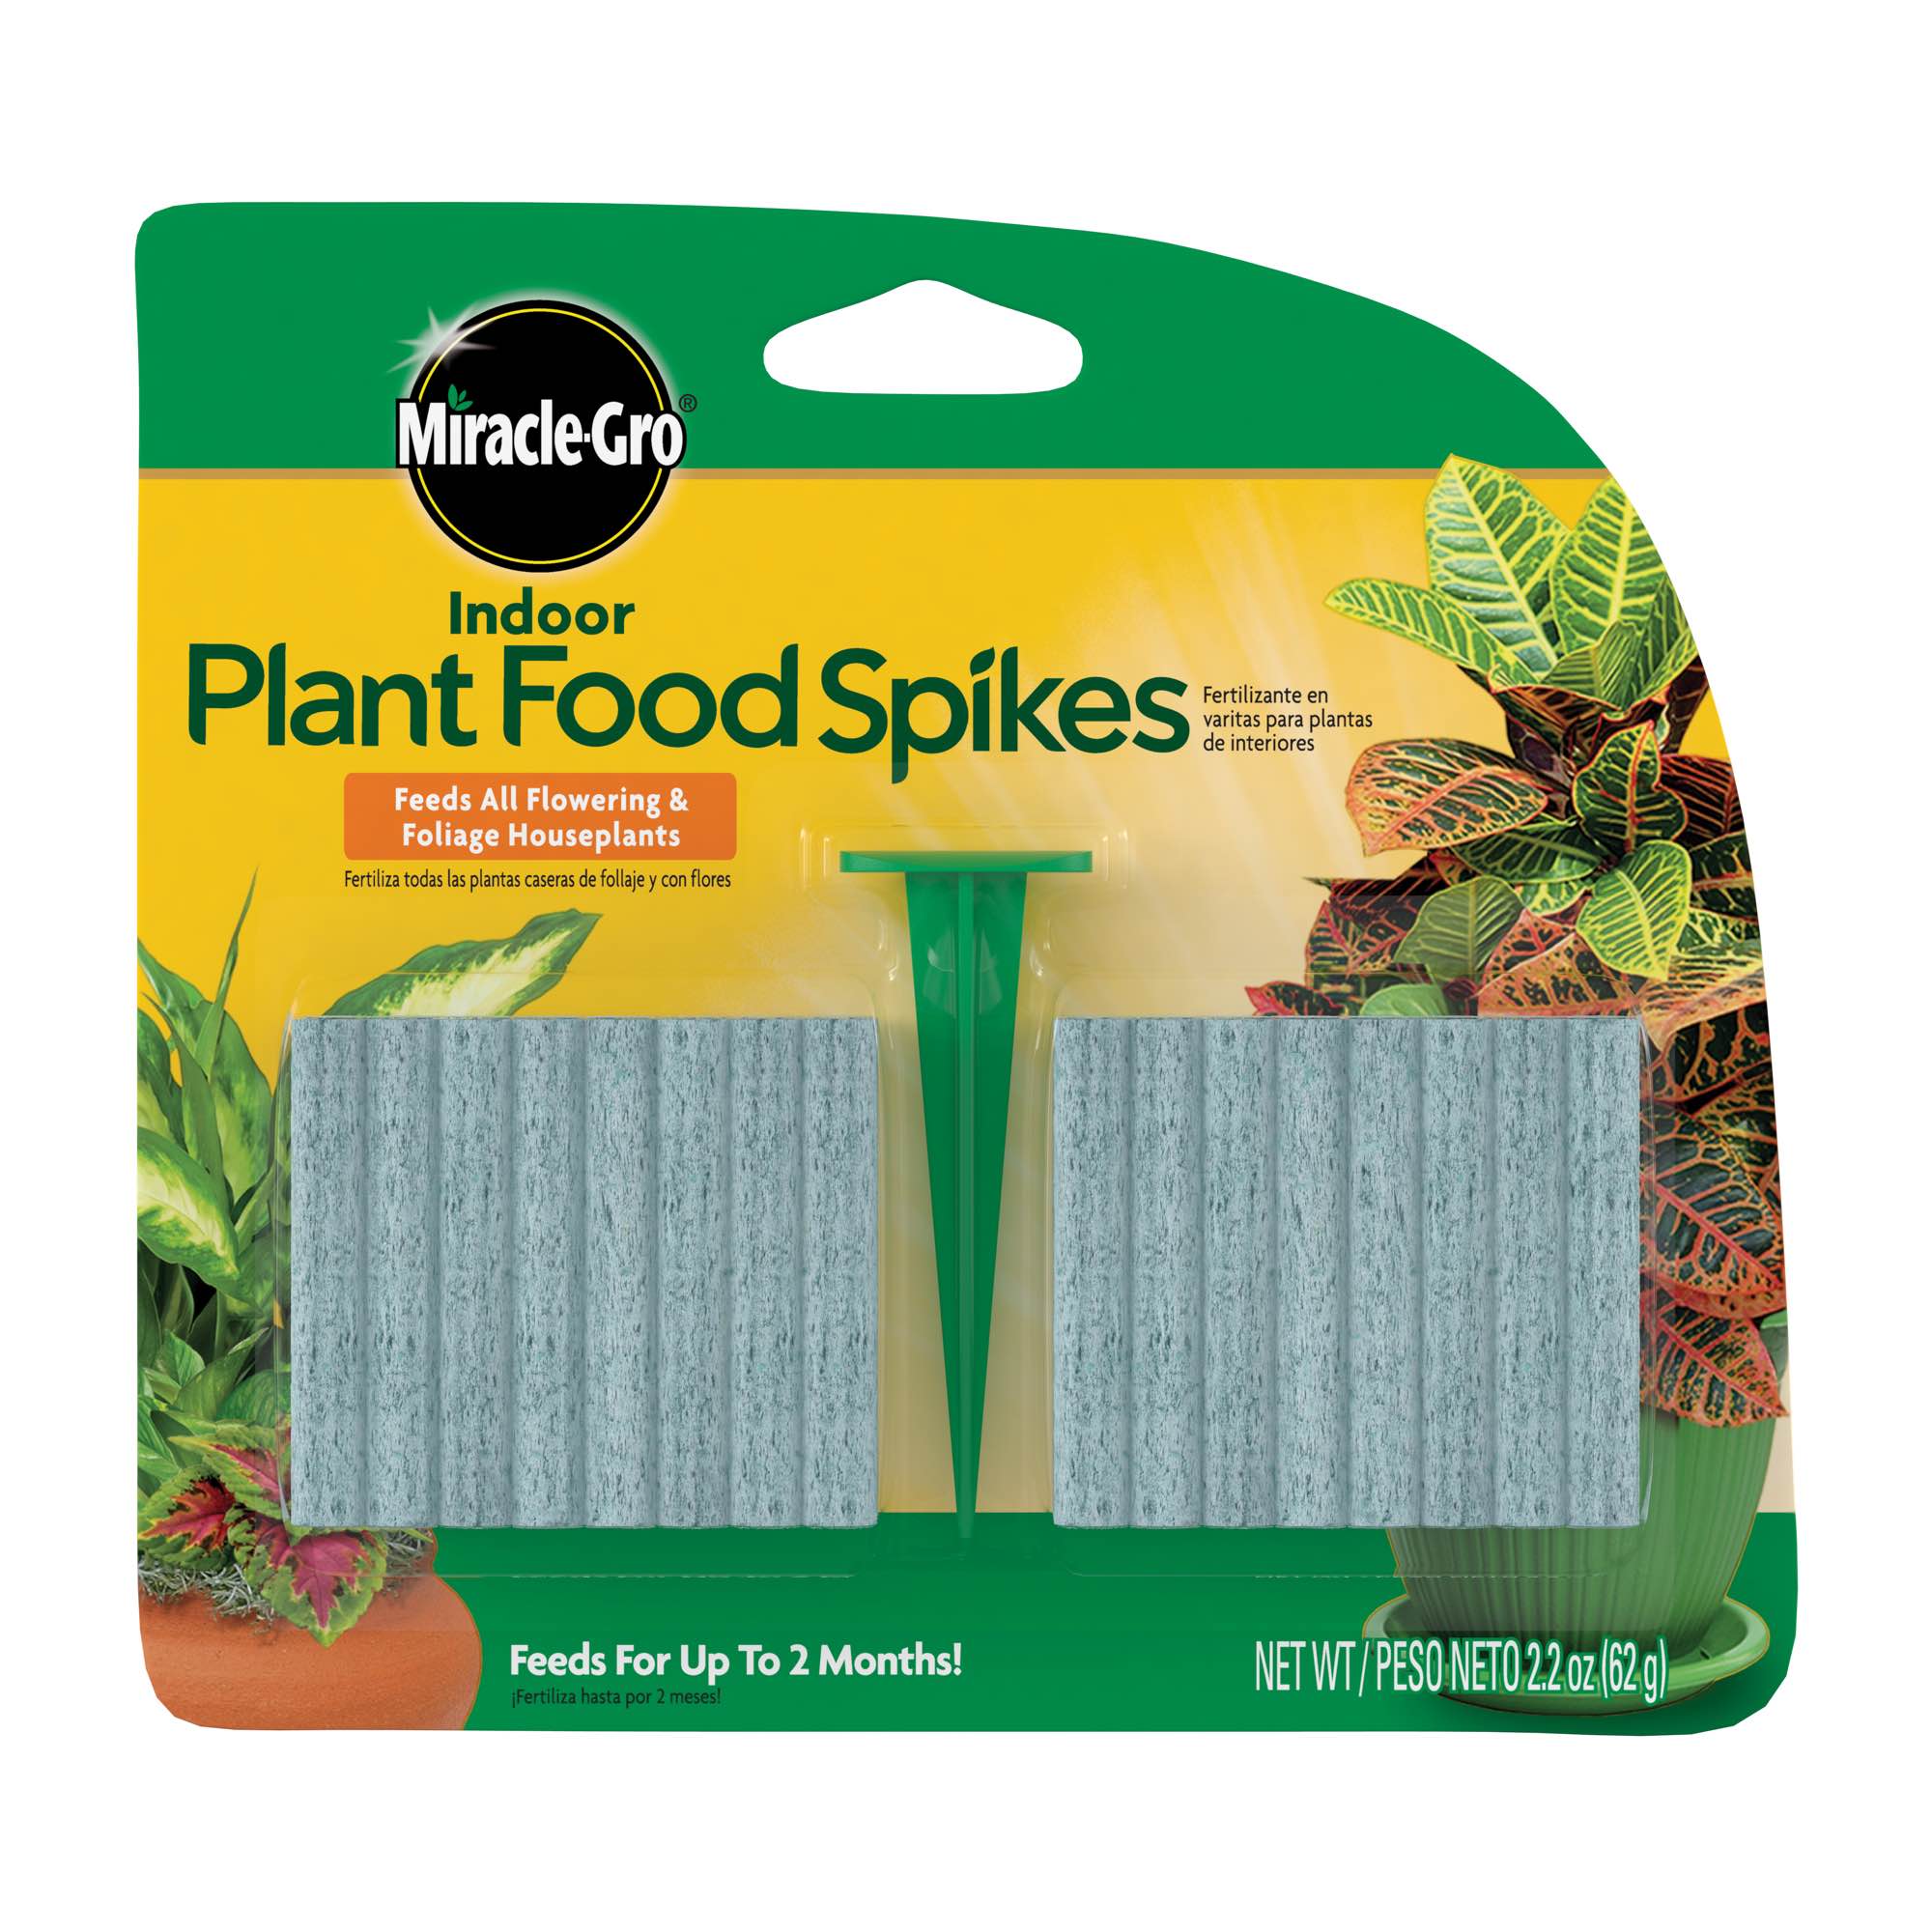 Miracle Gro Miracle-Gro Indoor Plant Food Spikes